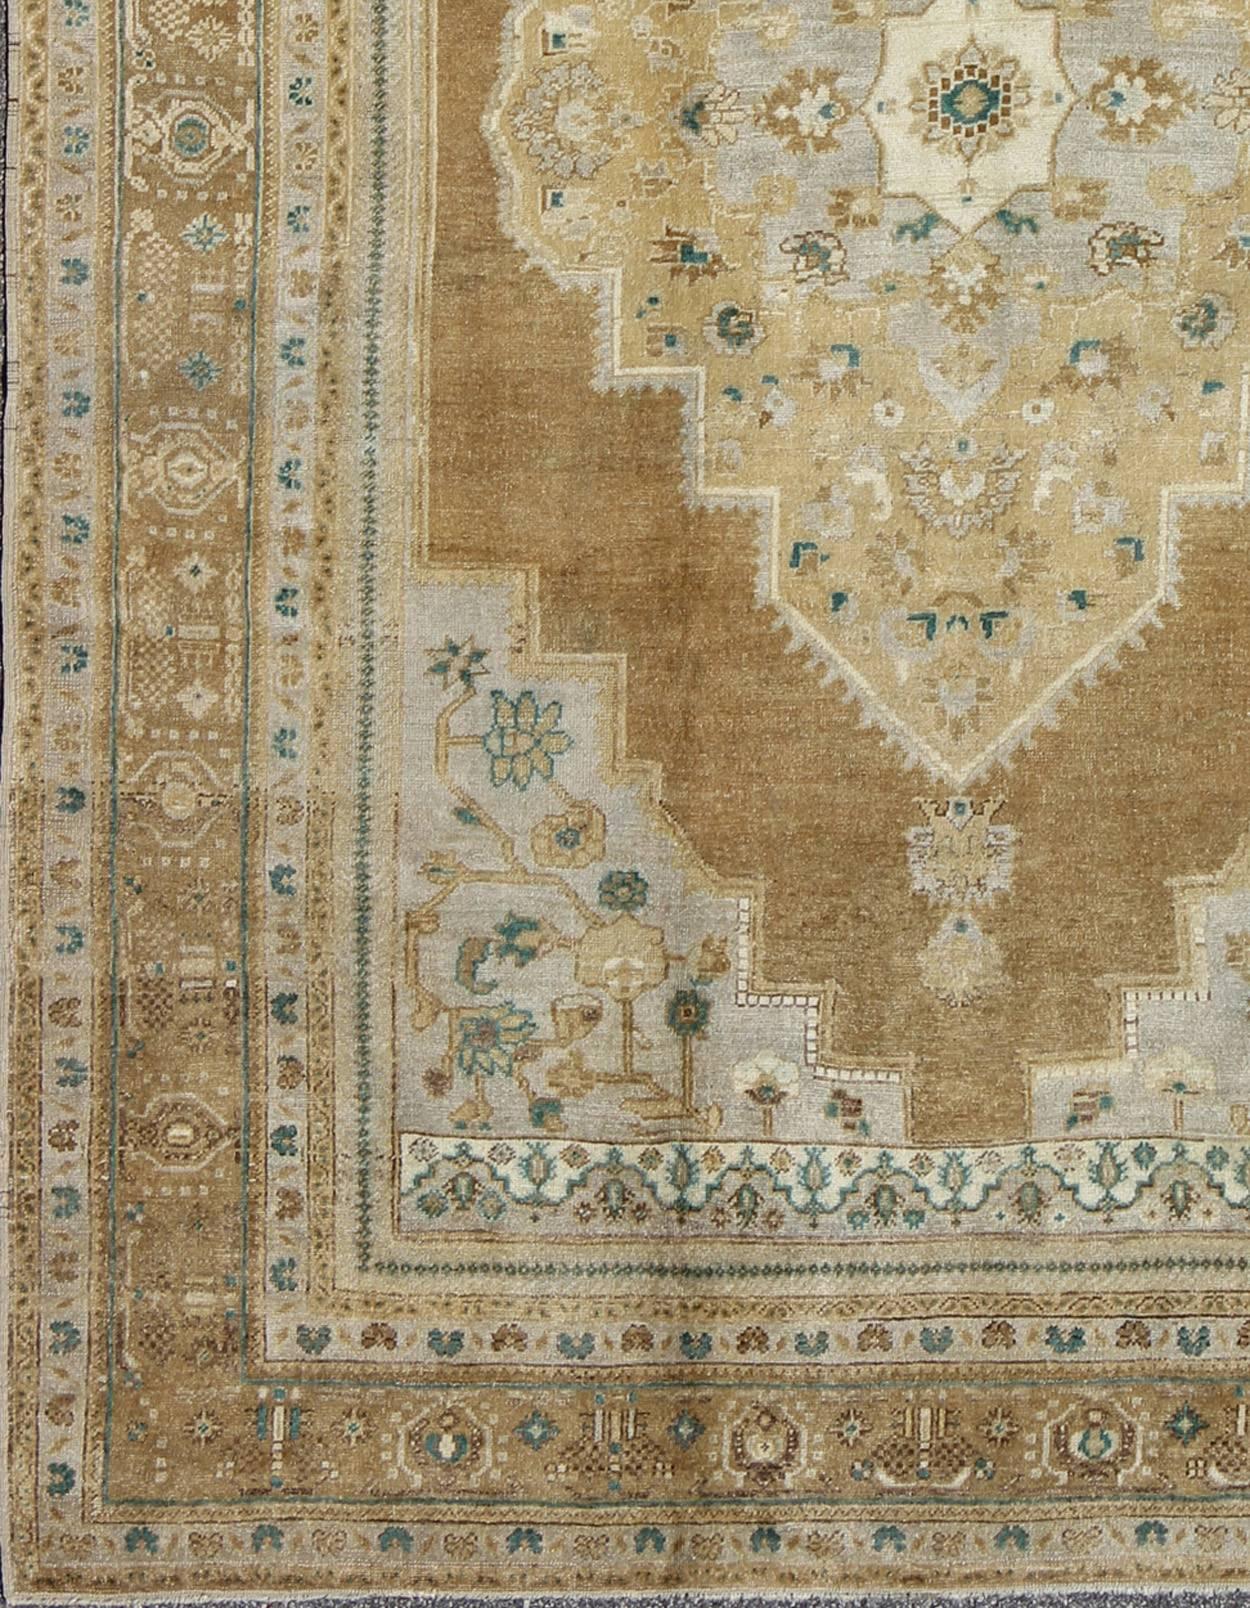 Vintage Oushak Turkish Rug in Light Golden Brown, Gray/Blue and Teal Accents.
This magnificent Oushak beautifully illustrates the impressive craftsmanship and design of Turkish weavers. The muted design gives the illusion of the large medallion